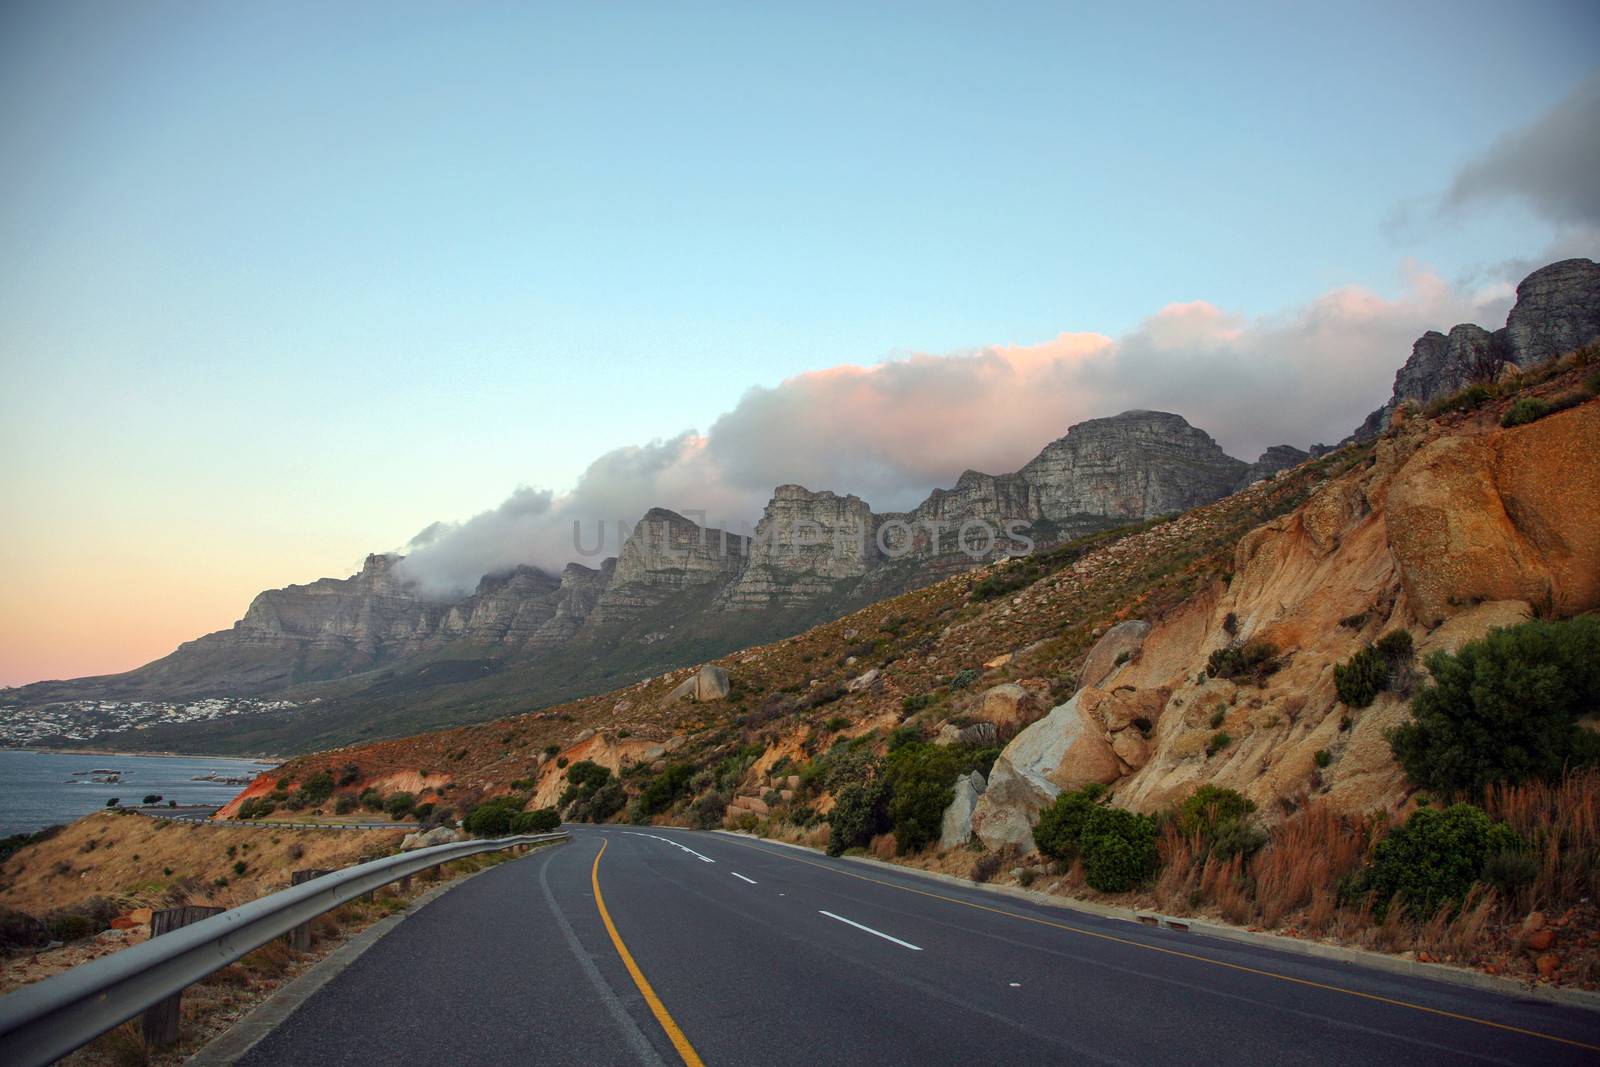 Beautiful view of Table Mountain in Cape Town from the road.